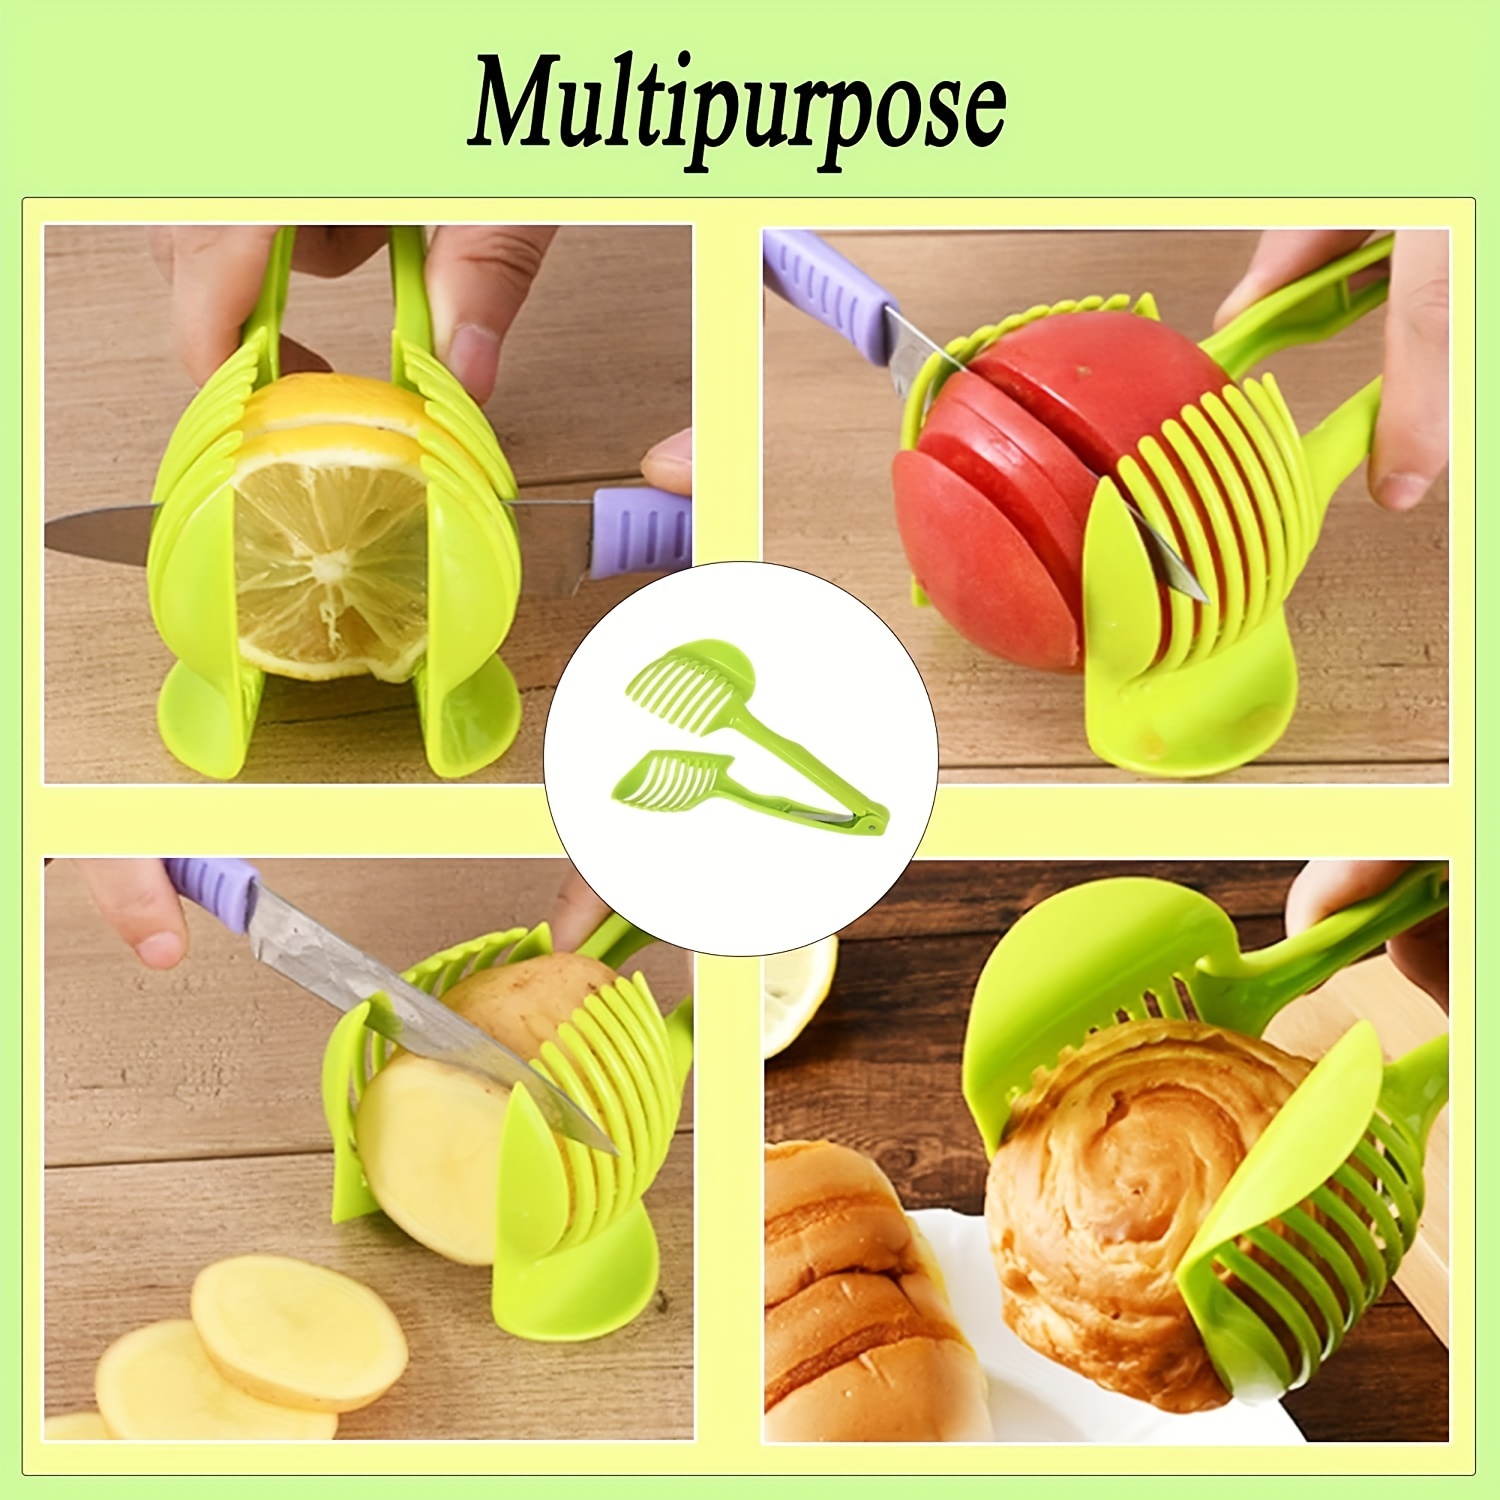 Vegetable Slicer Quick Potato Tomato Fruit Cutter Set with 3